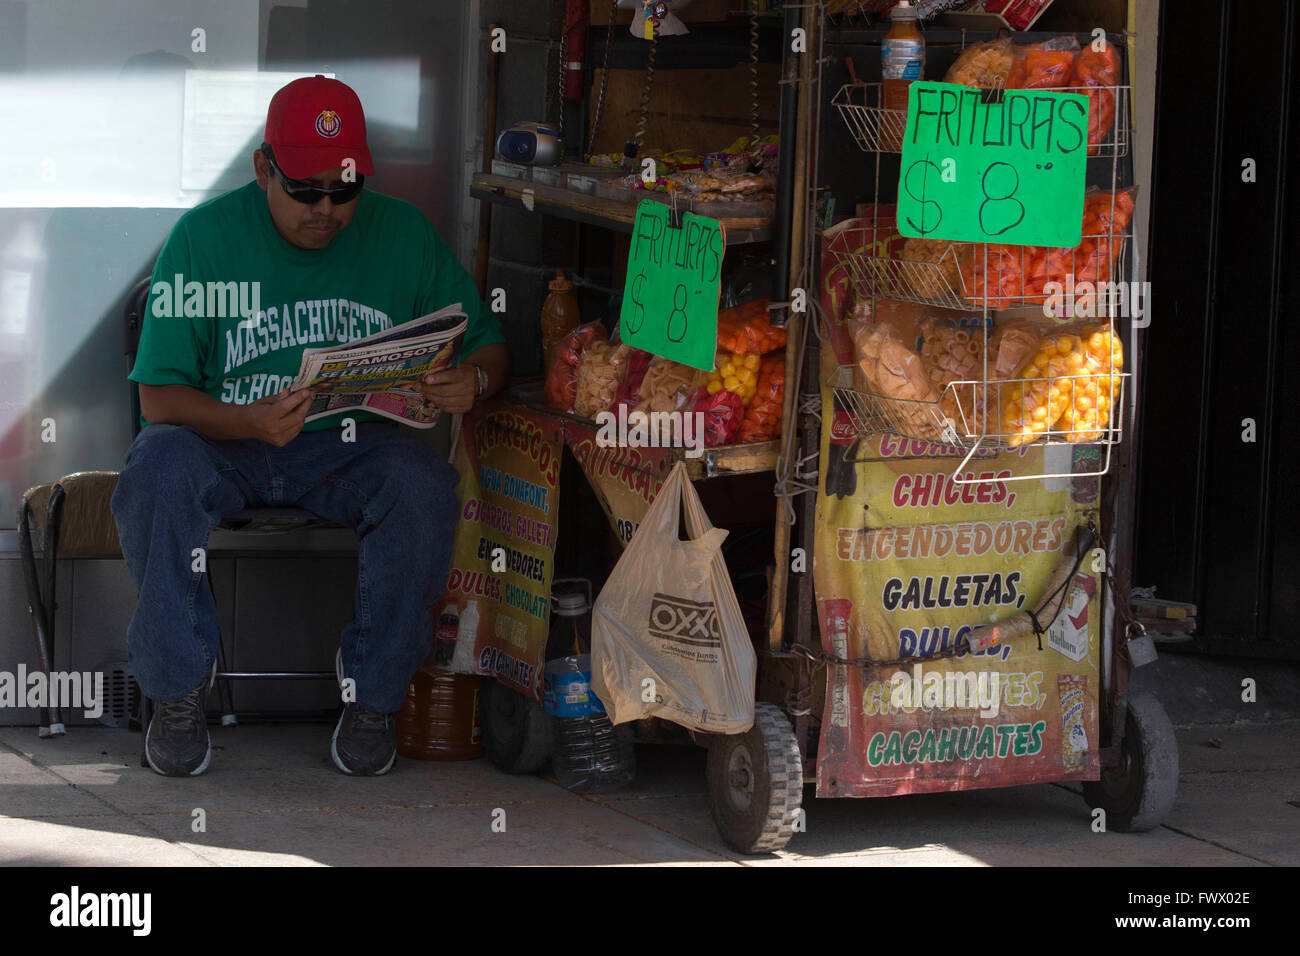 Mexico City, Mexico. 7th Apr, 2016. A person sells fry-up in a street stall in Mexico City, capital of Mexico, on April 7, 2016. According to local press, in Mexico around the 70 percent of adults have obesity or overweight and the country registers the highest number of deaths from diabetes in Latin America, revealed in a study of the World Health Organization. UN Secretary-General Ban Ki-moon on Thursday said that diabetes now causes some 1.5 million deaths a year and called for healthier lifestyles on this year's World Health Day. © Alejandro Ayala/Xinhua/Alamy Live News Stock Photo